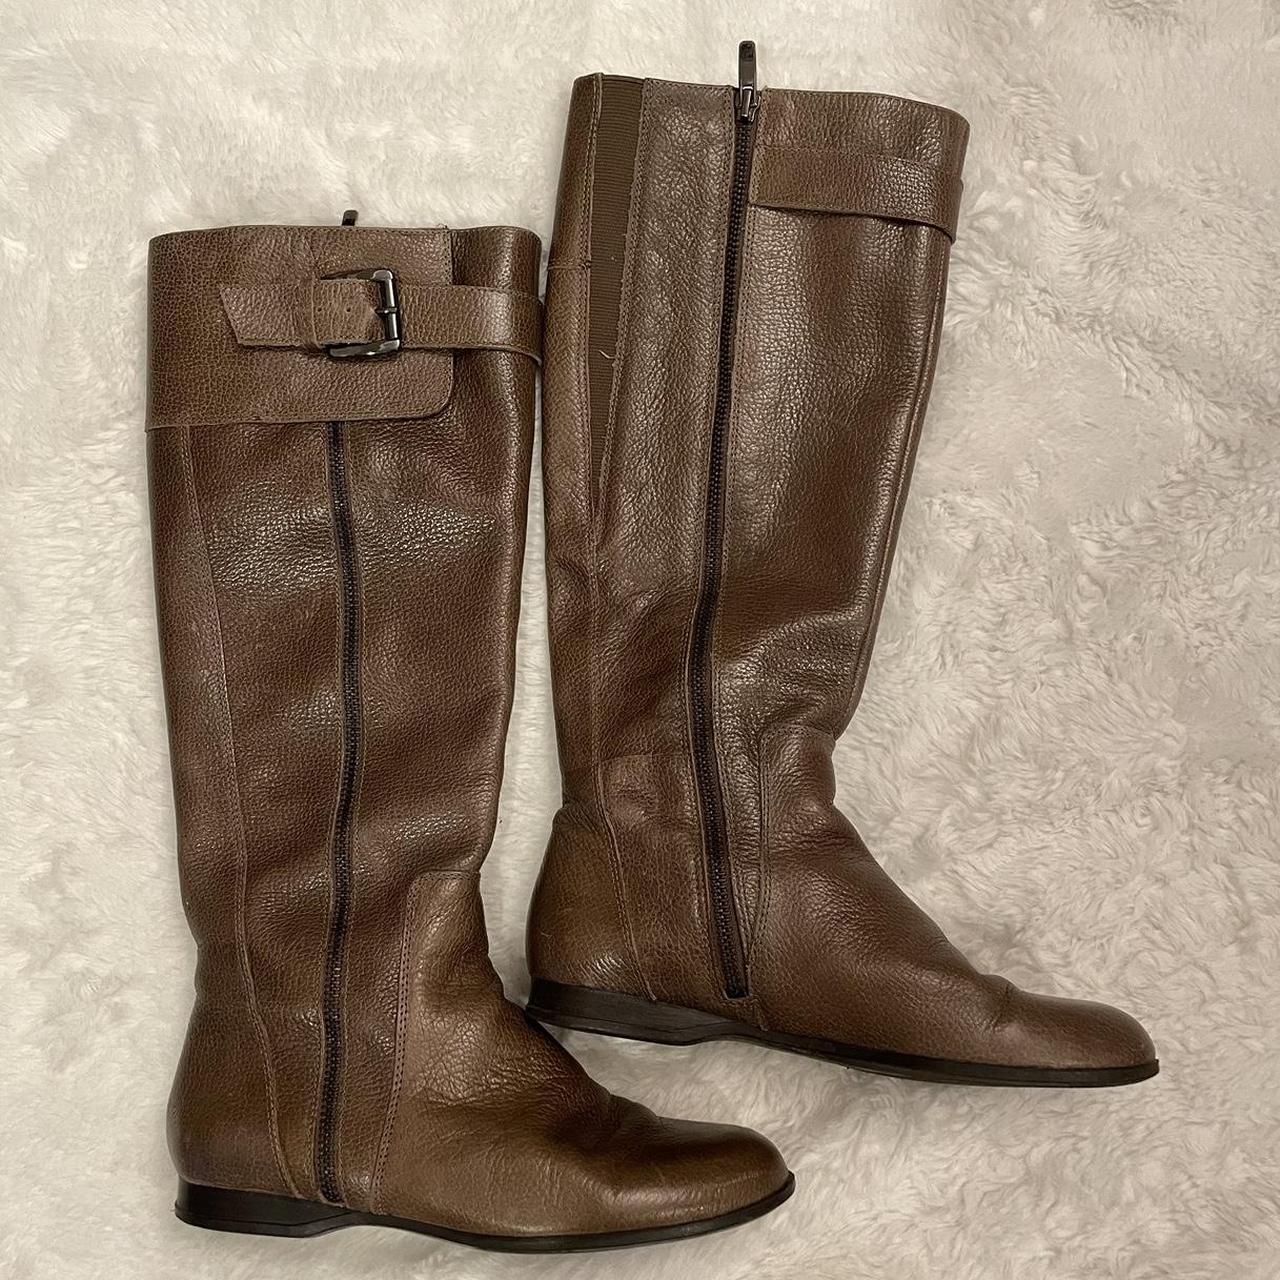 Enzo Angiolini Over The Knee Boots